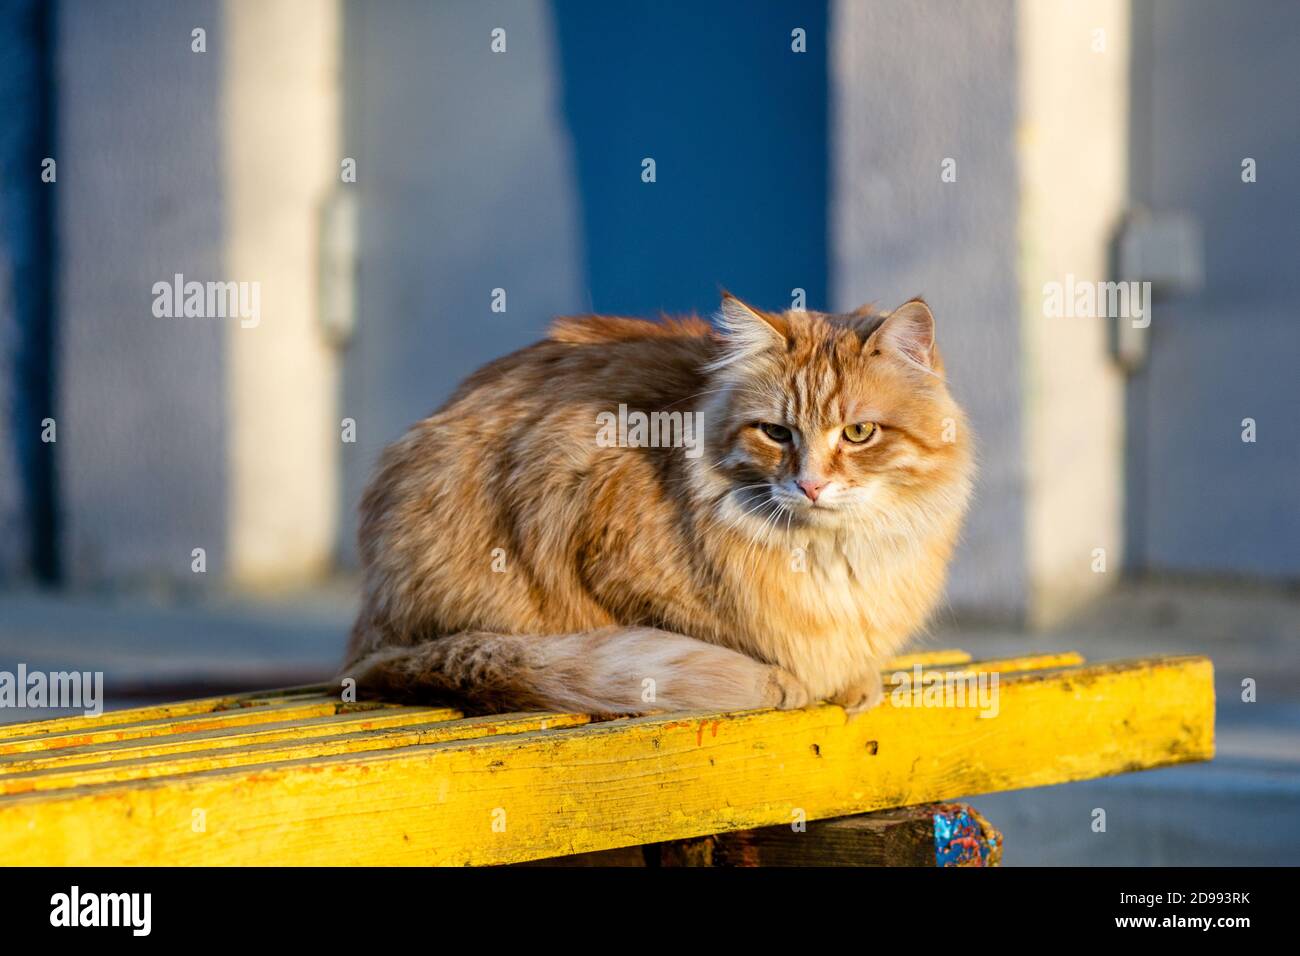 Red fluffy cat on a yellow bench Stock Photo